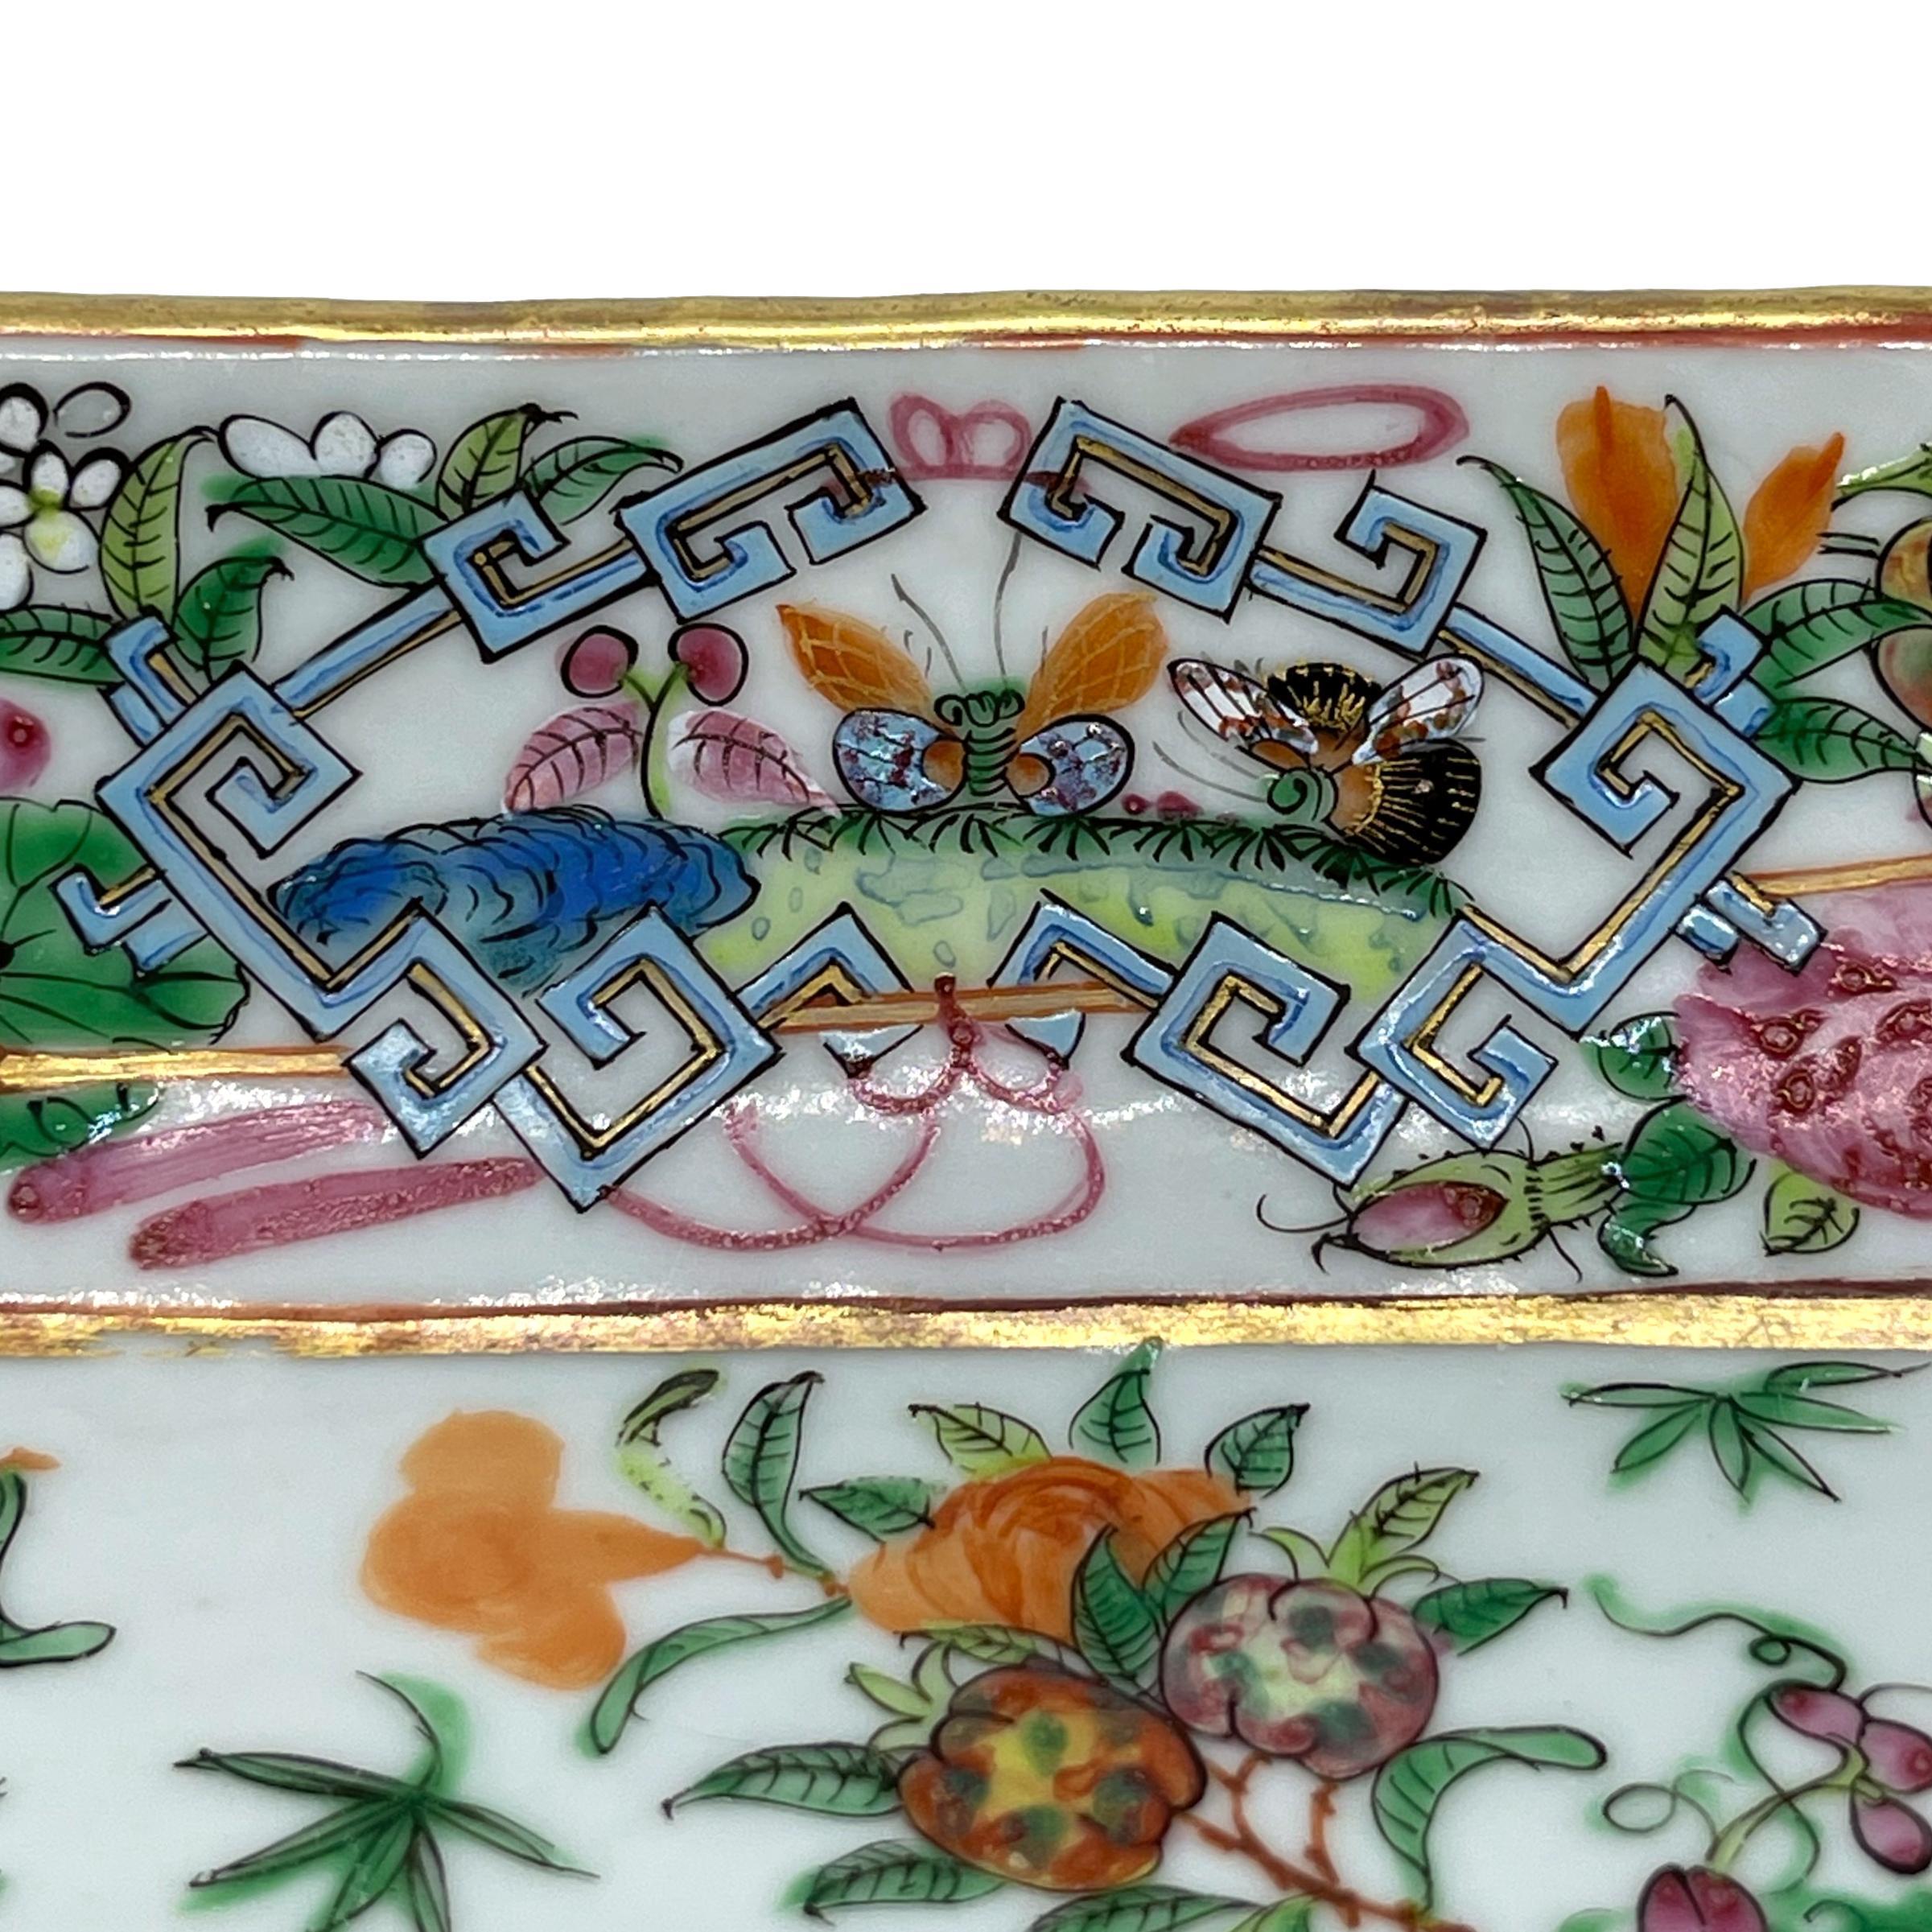 Enameled Famille Rose Square Dish, Canton, ca. 1840